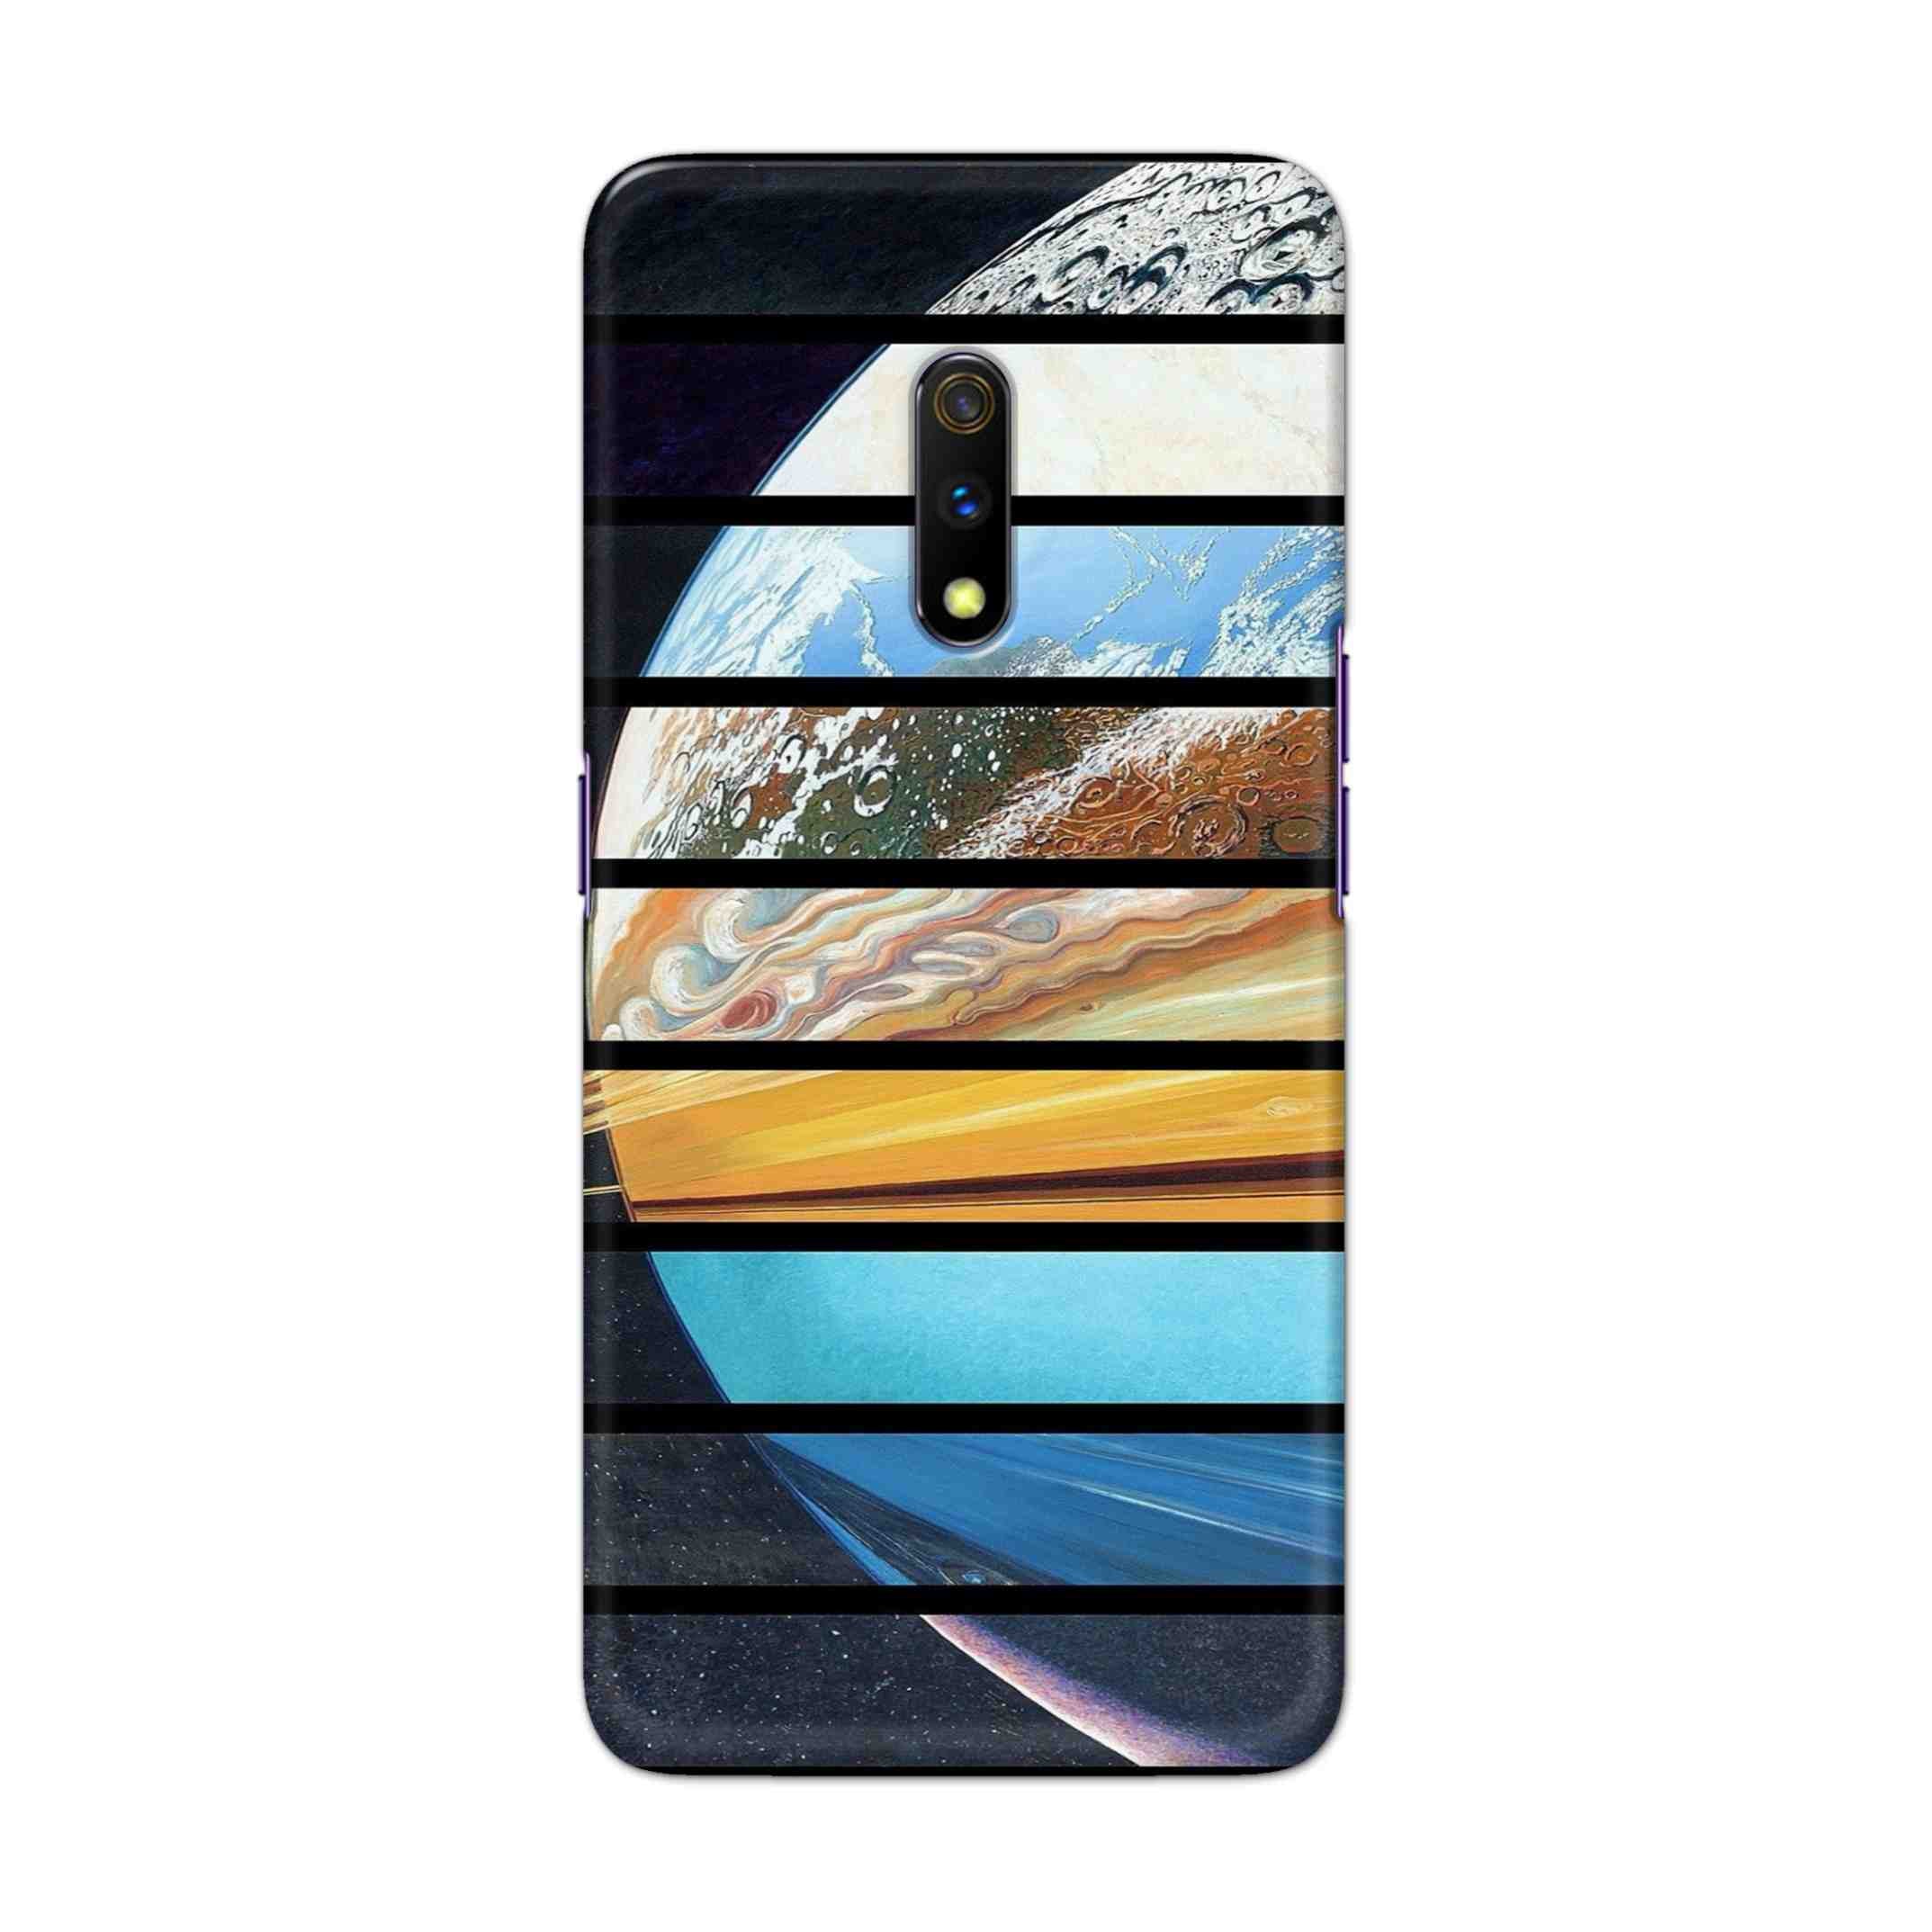 Buy Colourful Earth Hard Back Mobile Phone Case Cover For Oppo Realme X Online